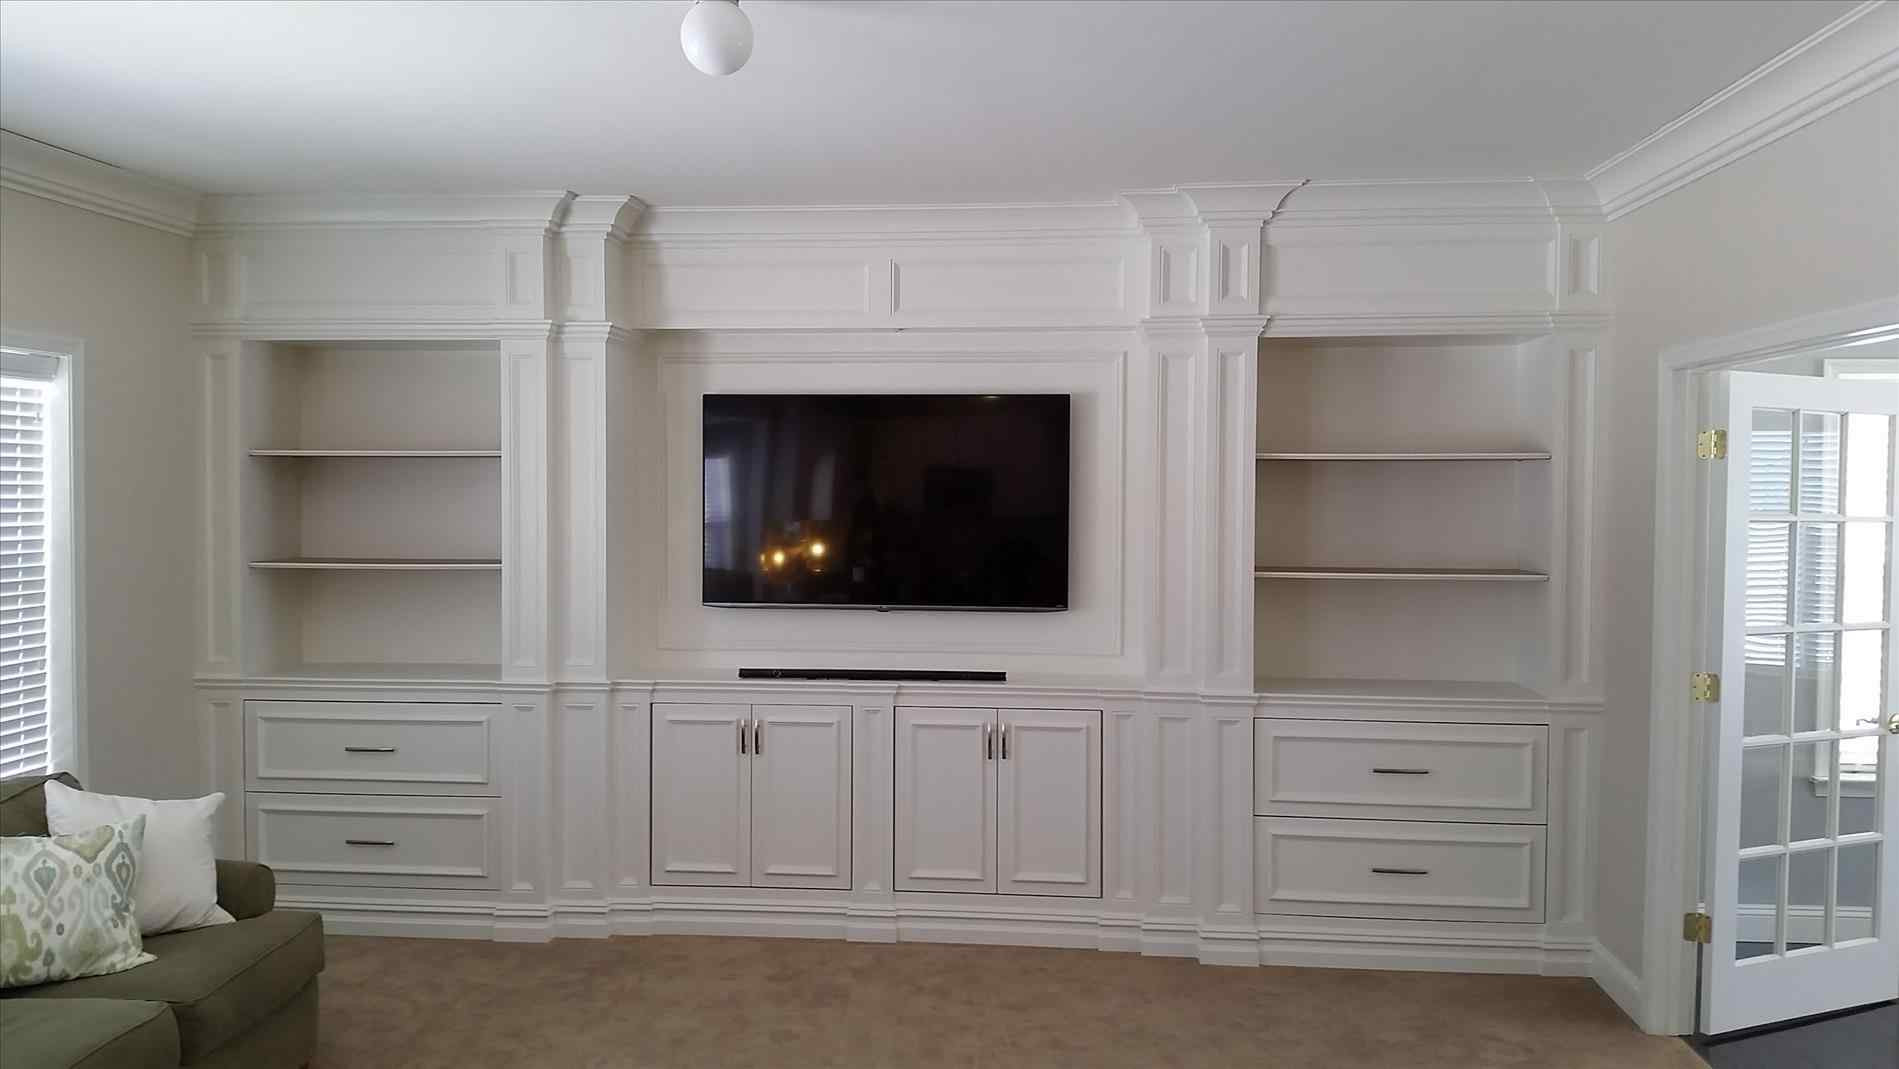 Bedroom Built In Cabinets
 Built In Bookcase Around Bed Buethe